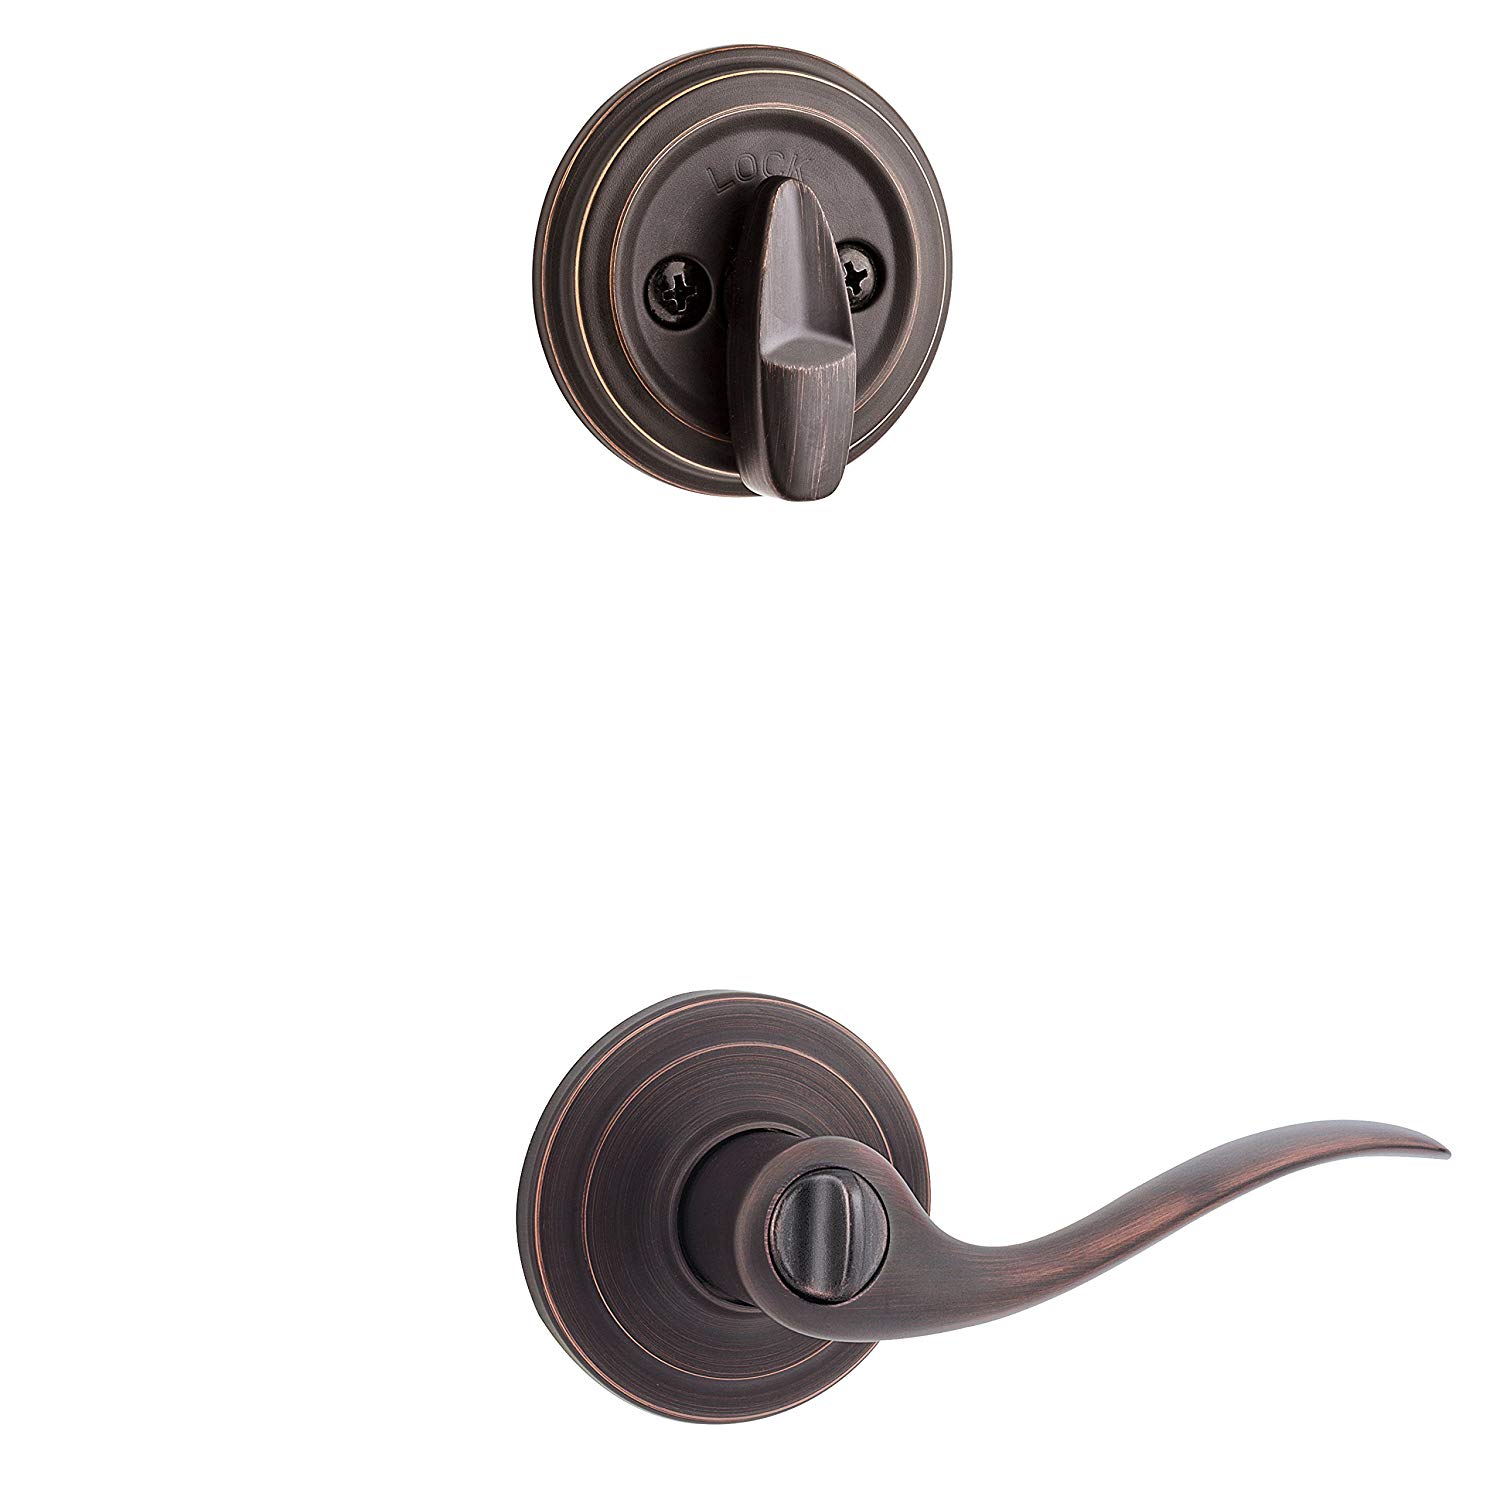 Kwikset 991 Tustin Keyed Door Lever and Sgl Cyl Deadbolt Combo Pack in VB 